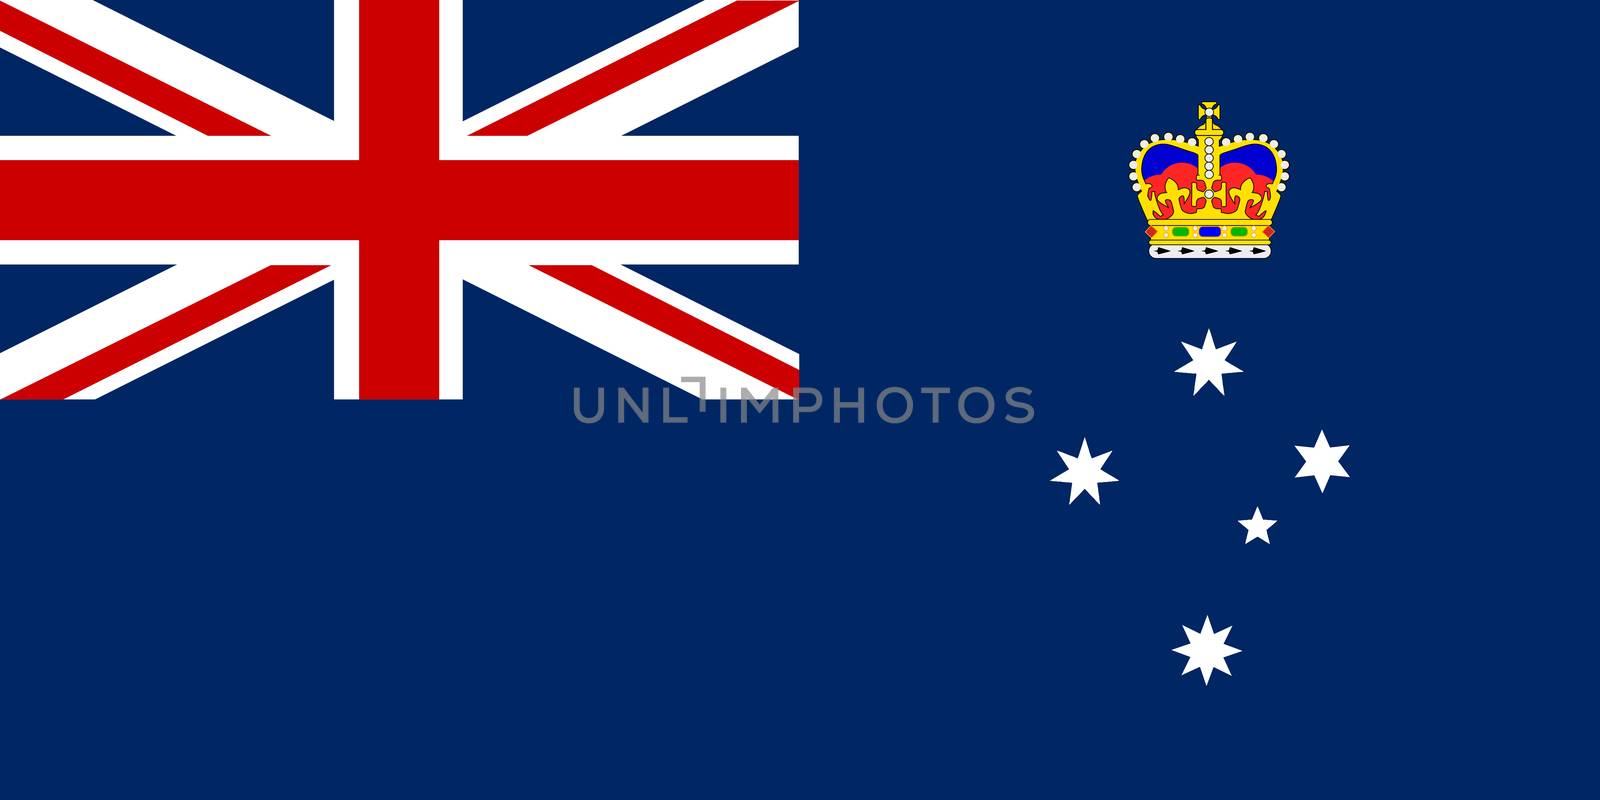 The flag of the Australian state of Victoria